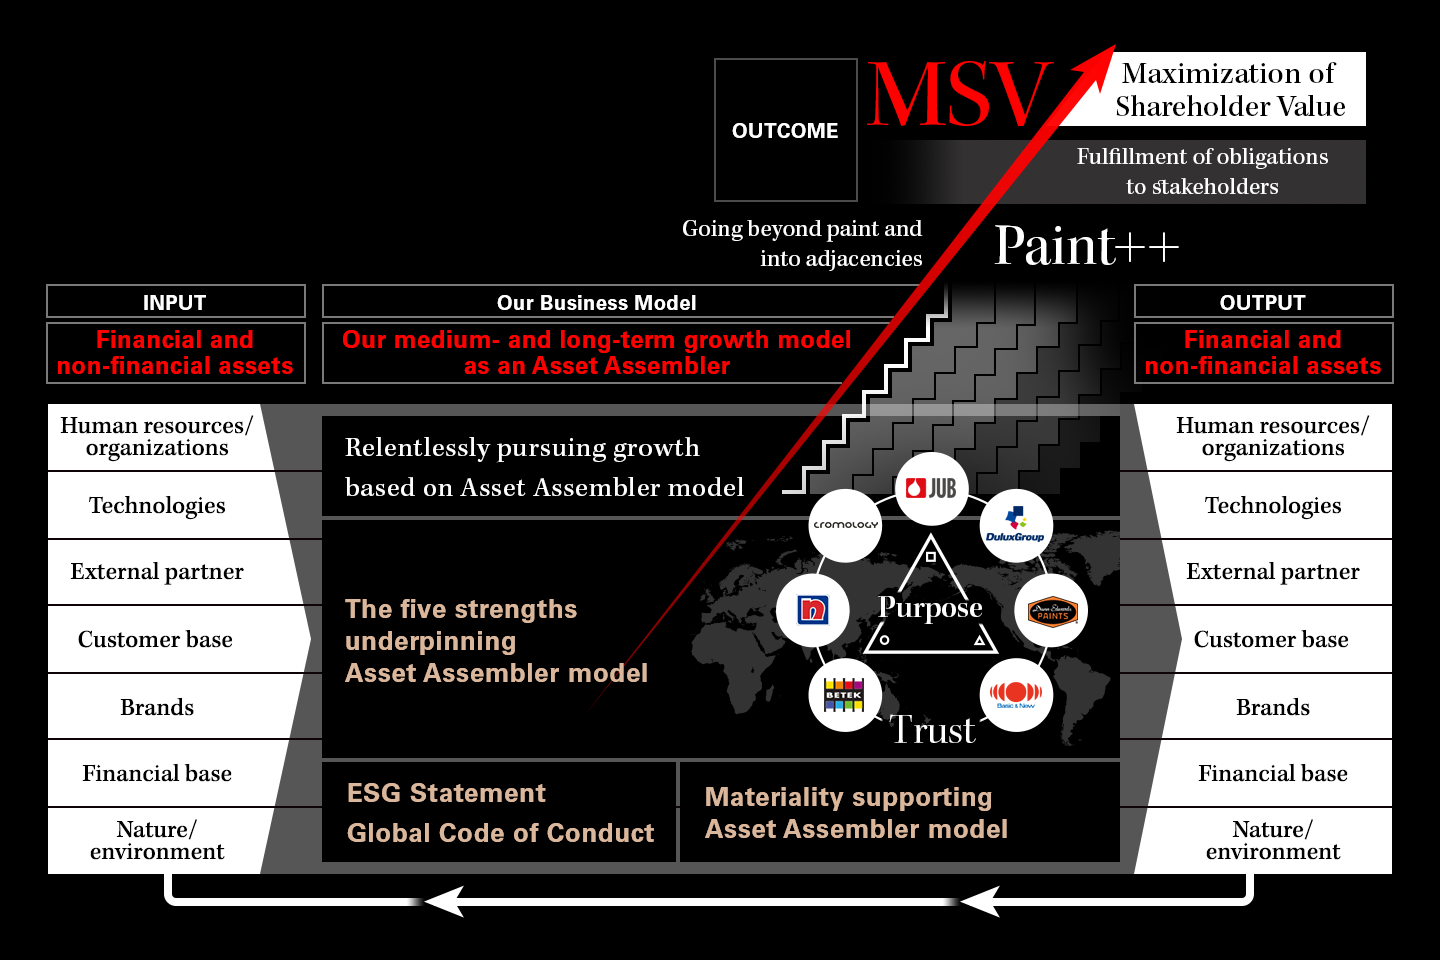 Image of Value Creation Model for Achieving MSV